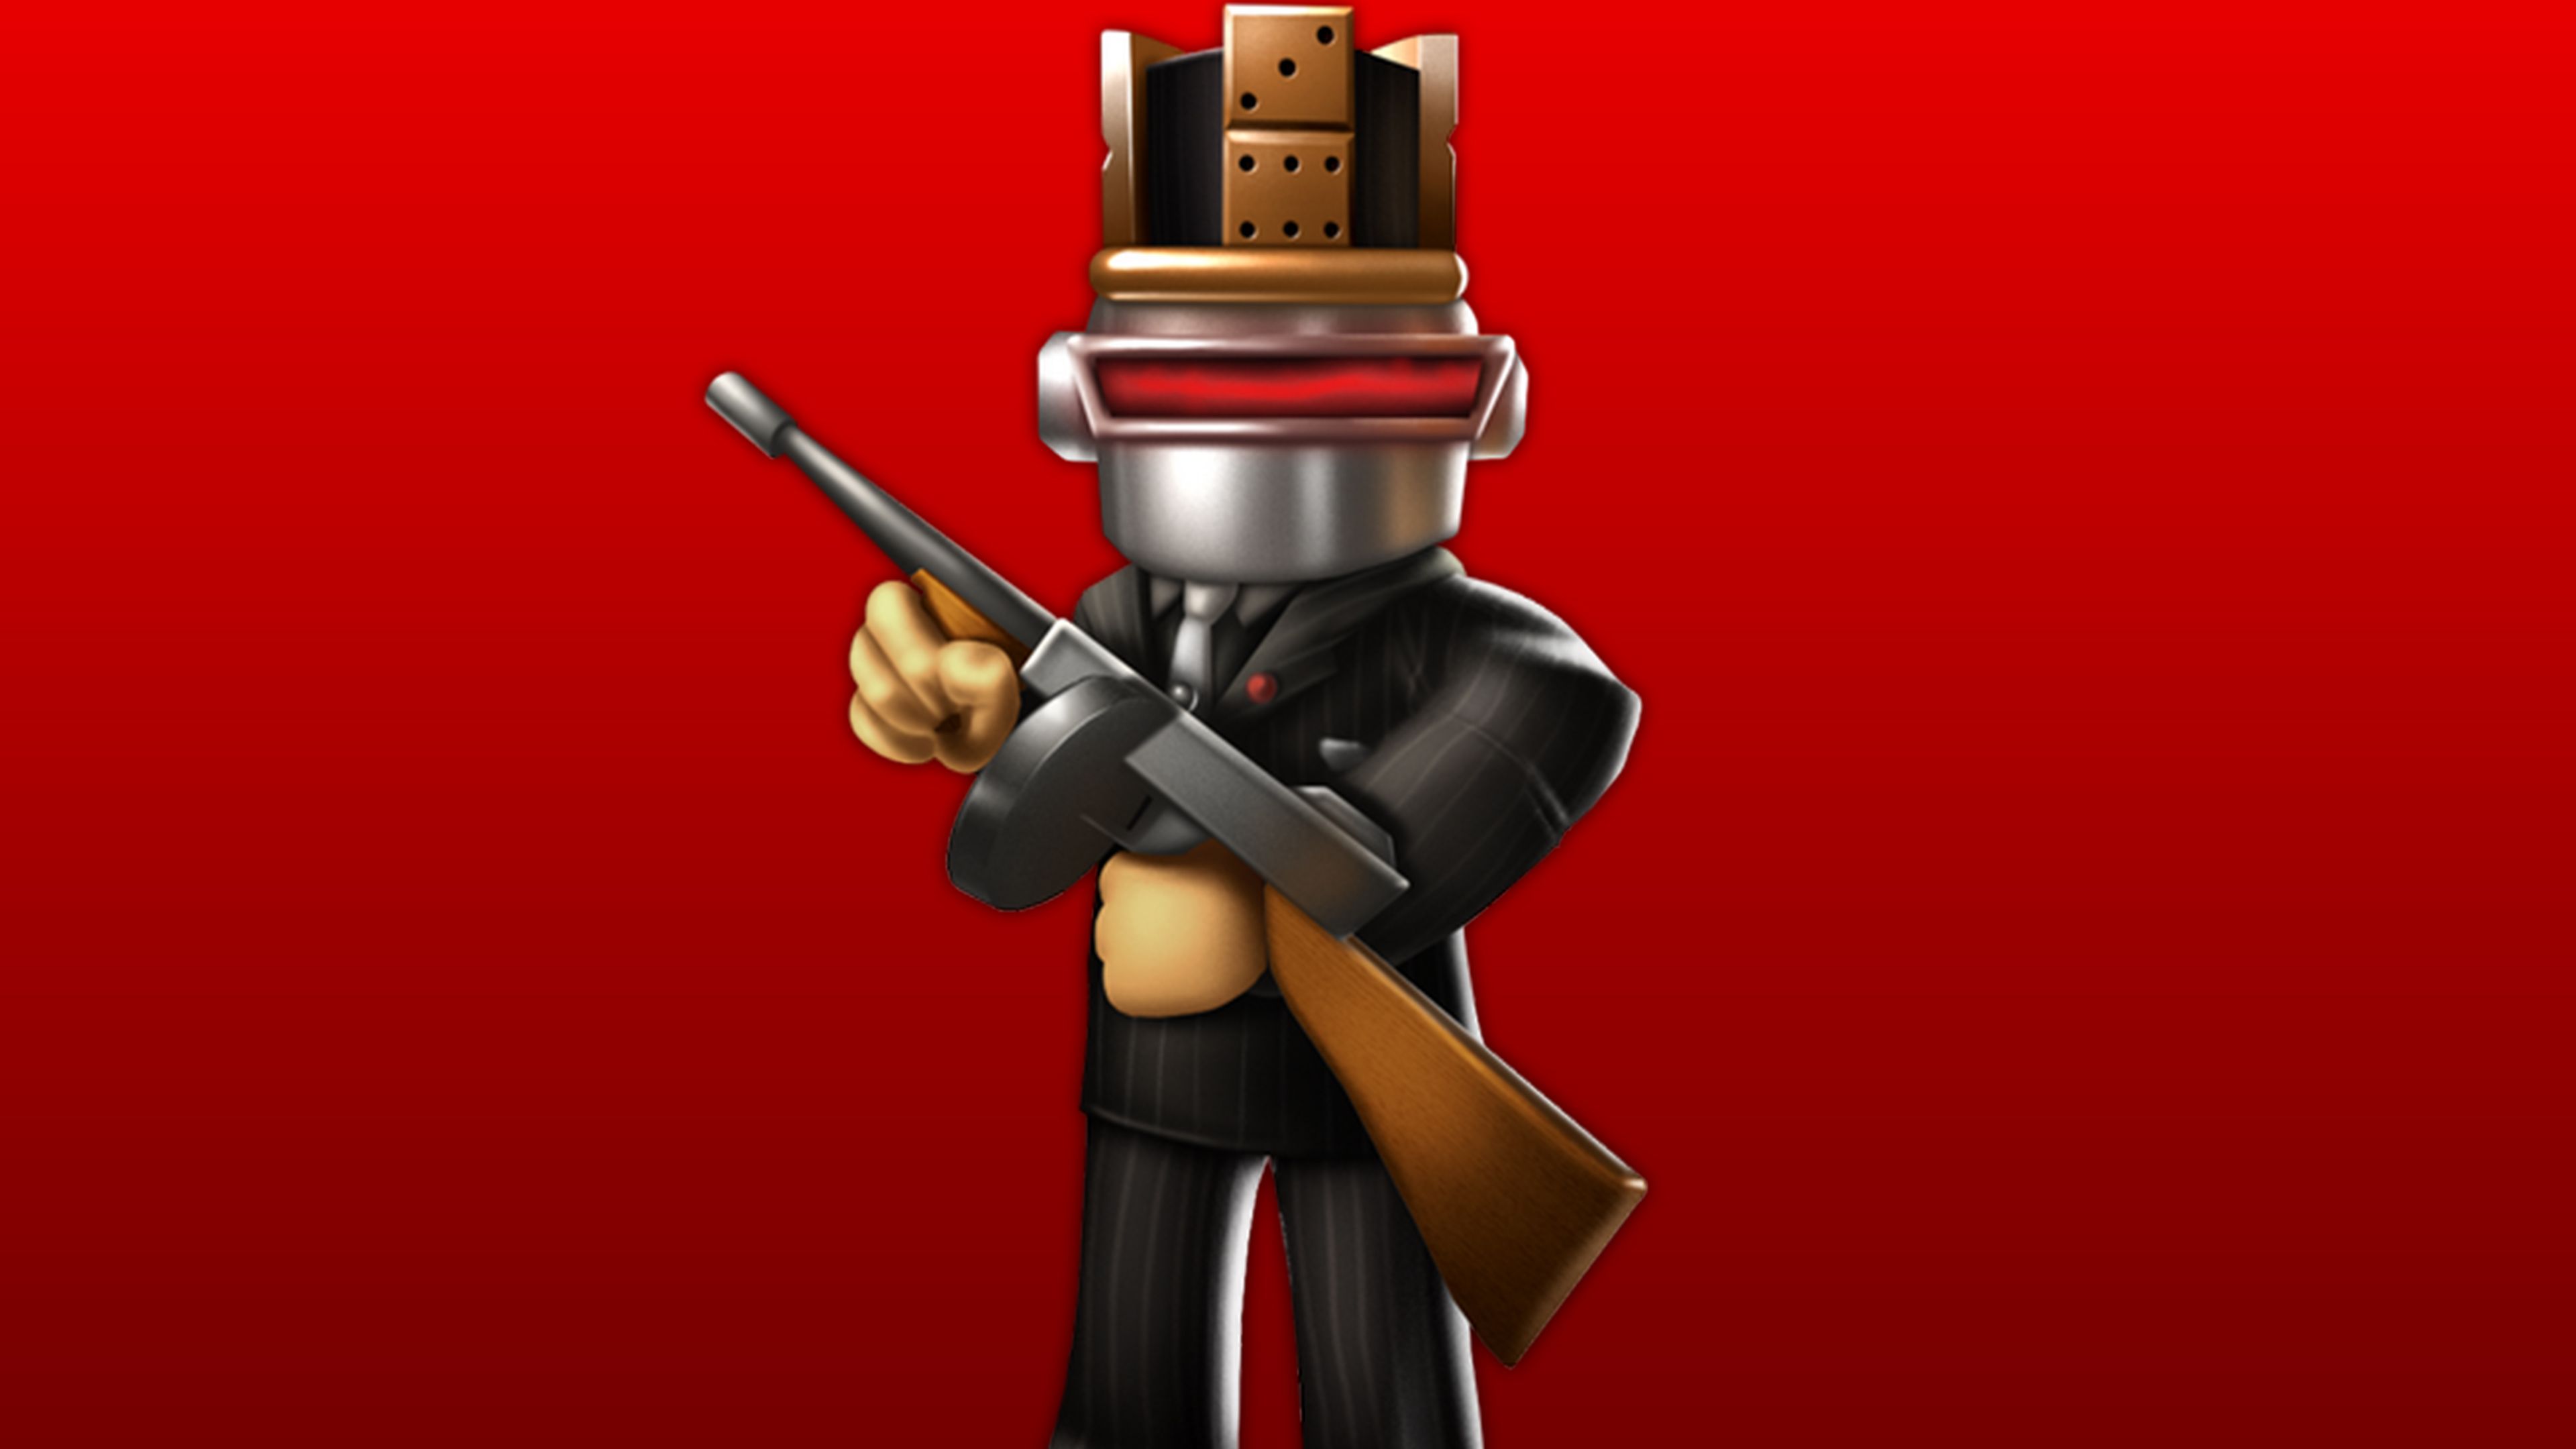 Cute Boys RobloxWallpapers